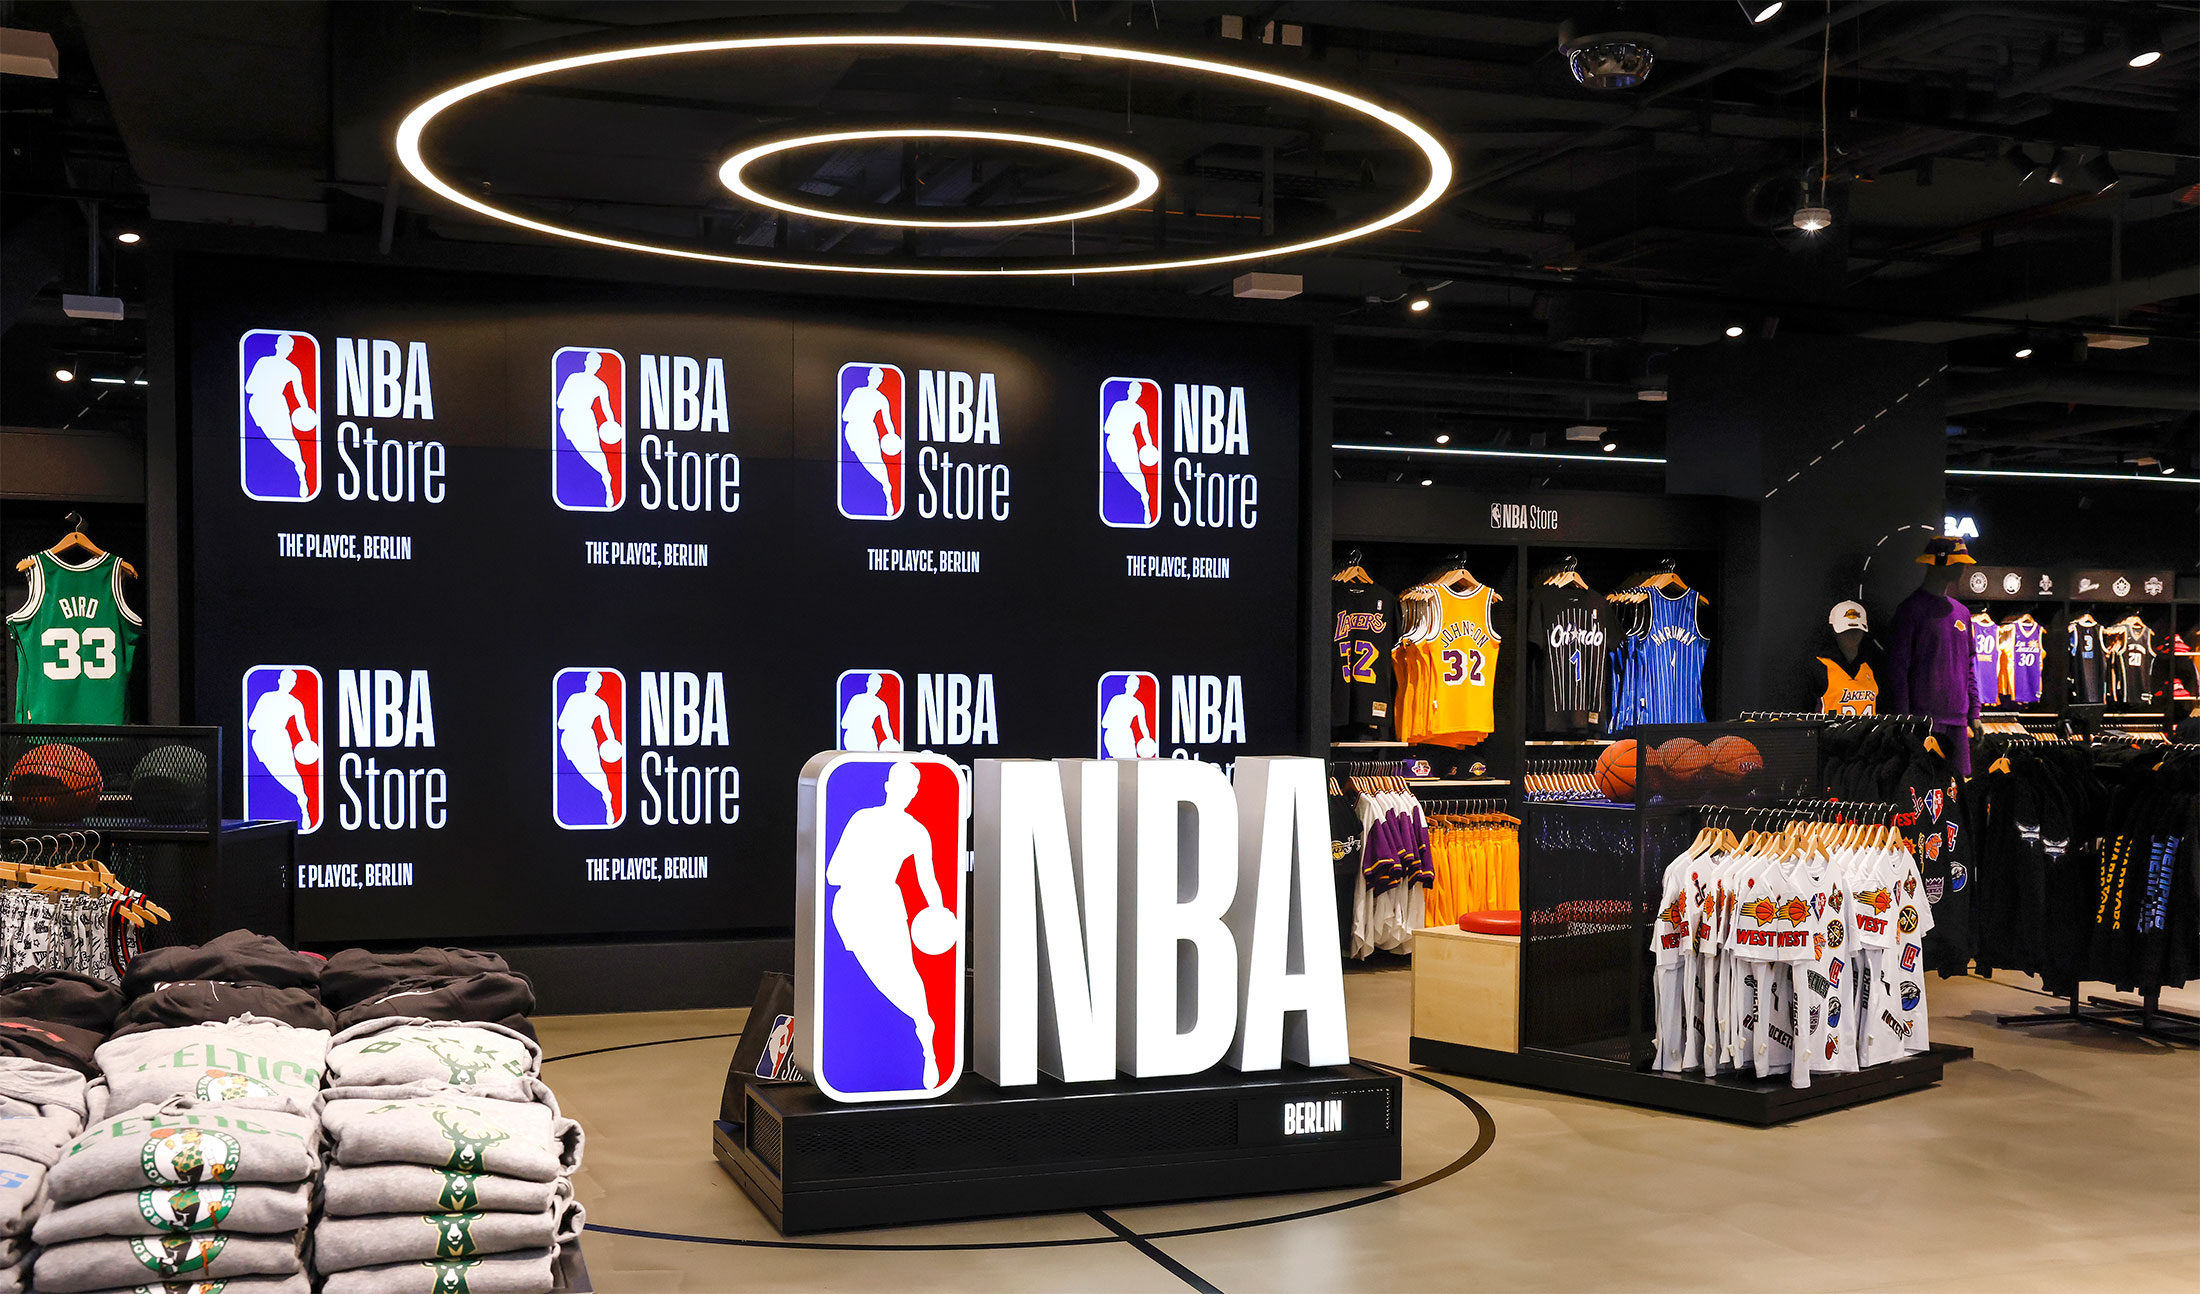 the nba store